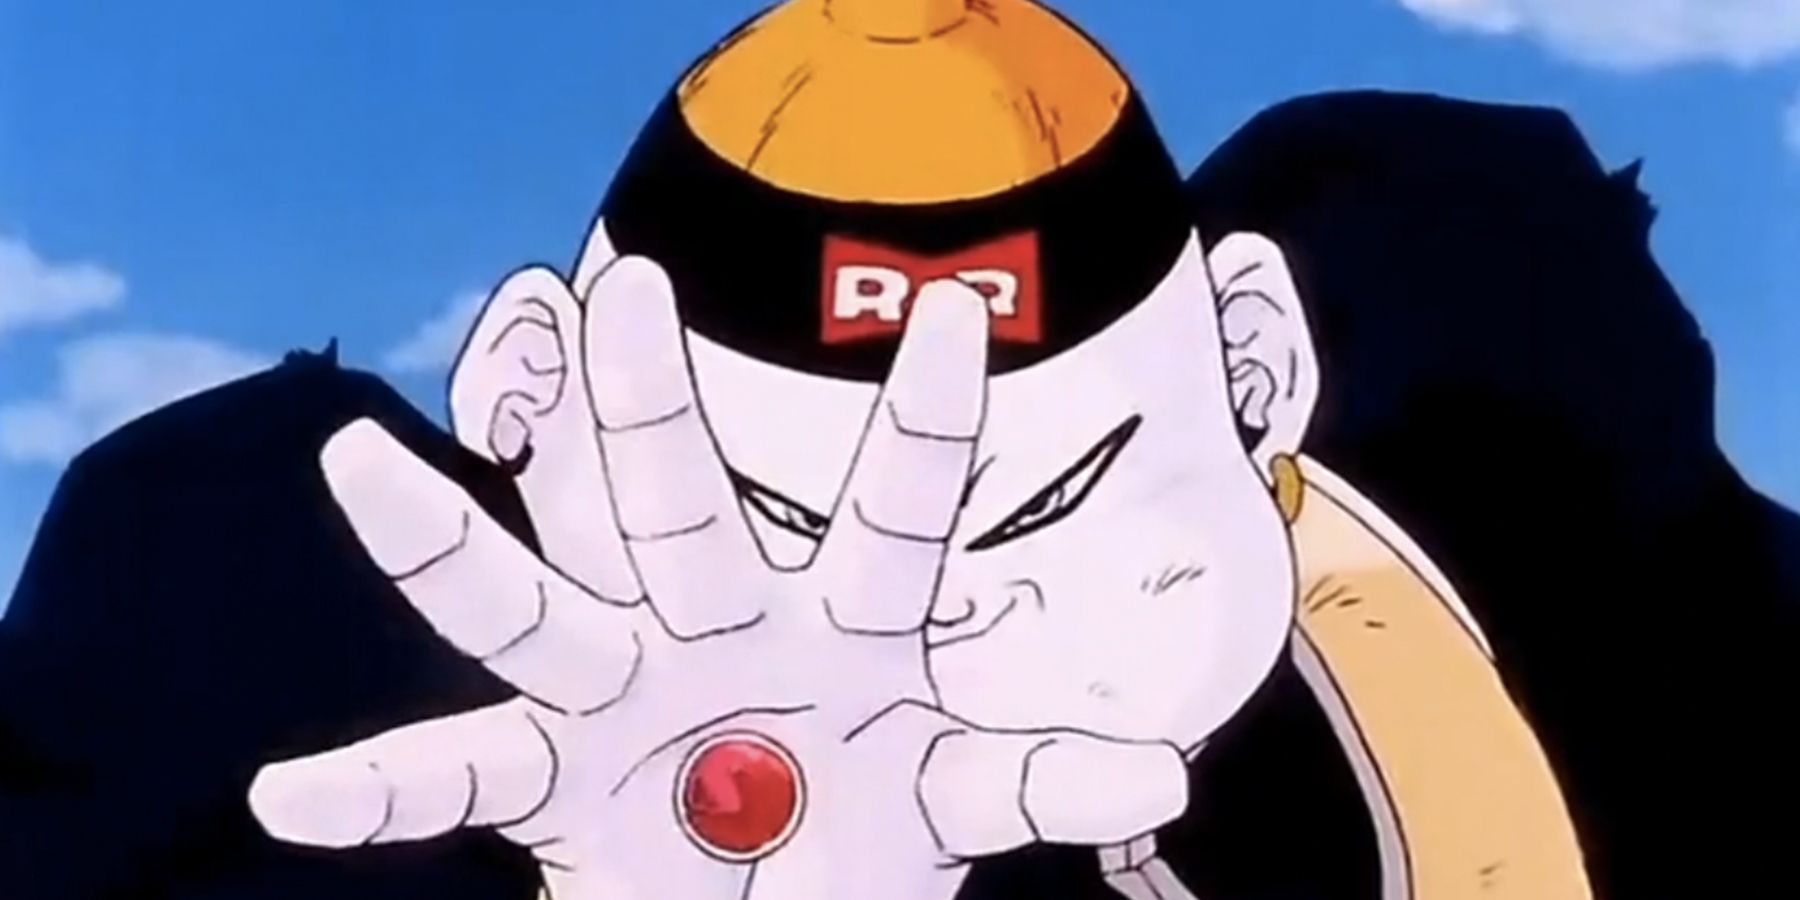 Android 19 gets ready to absorb energy in Dragon Ball Z.